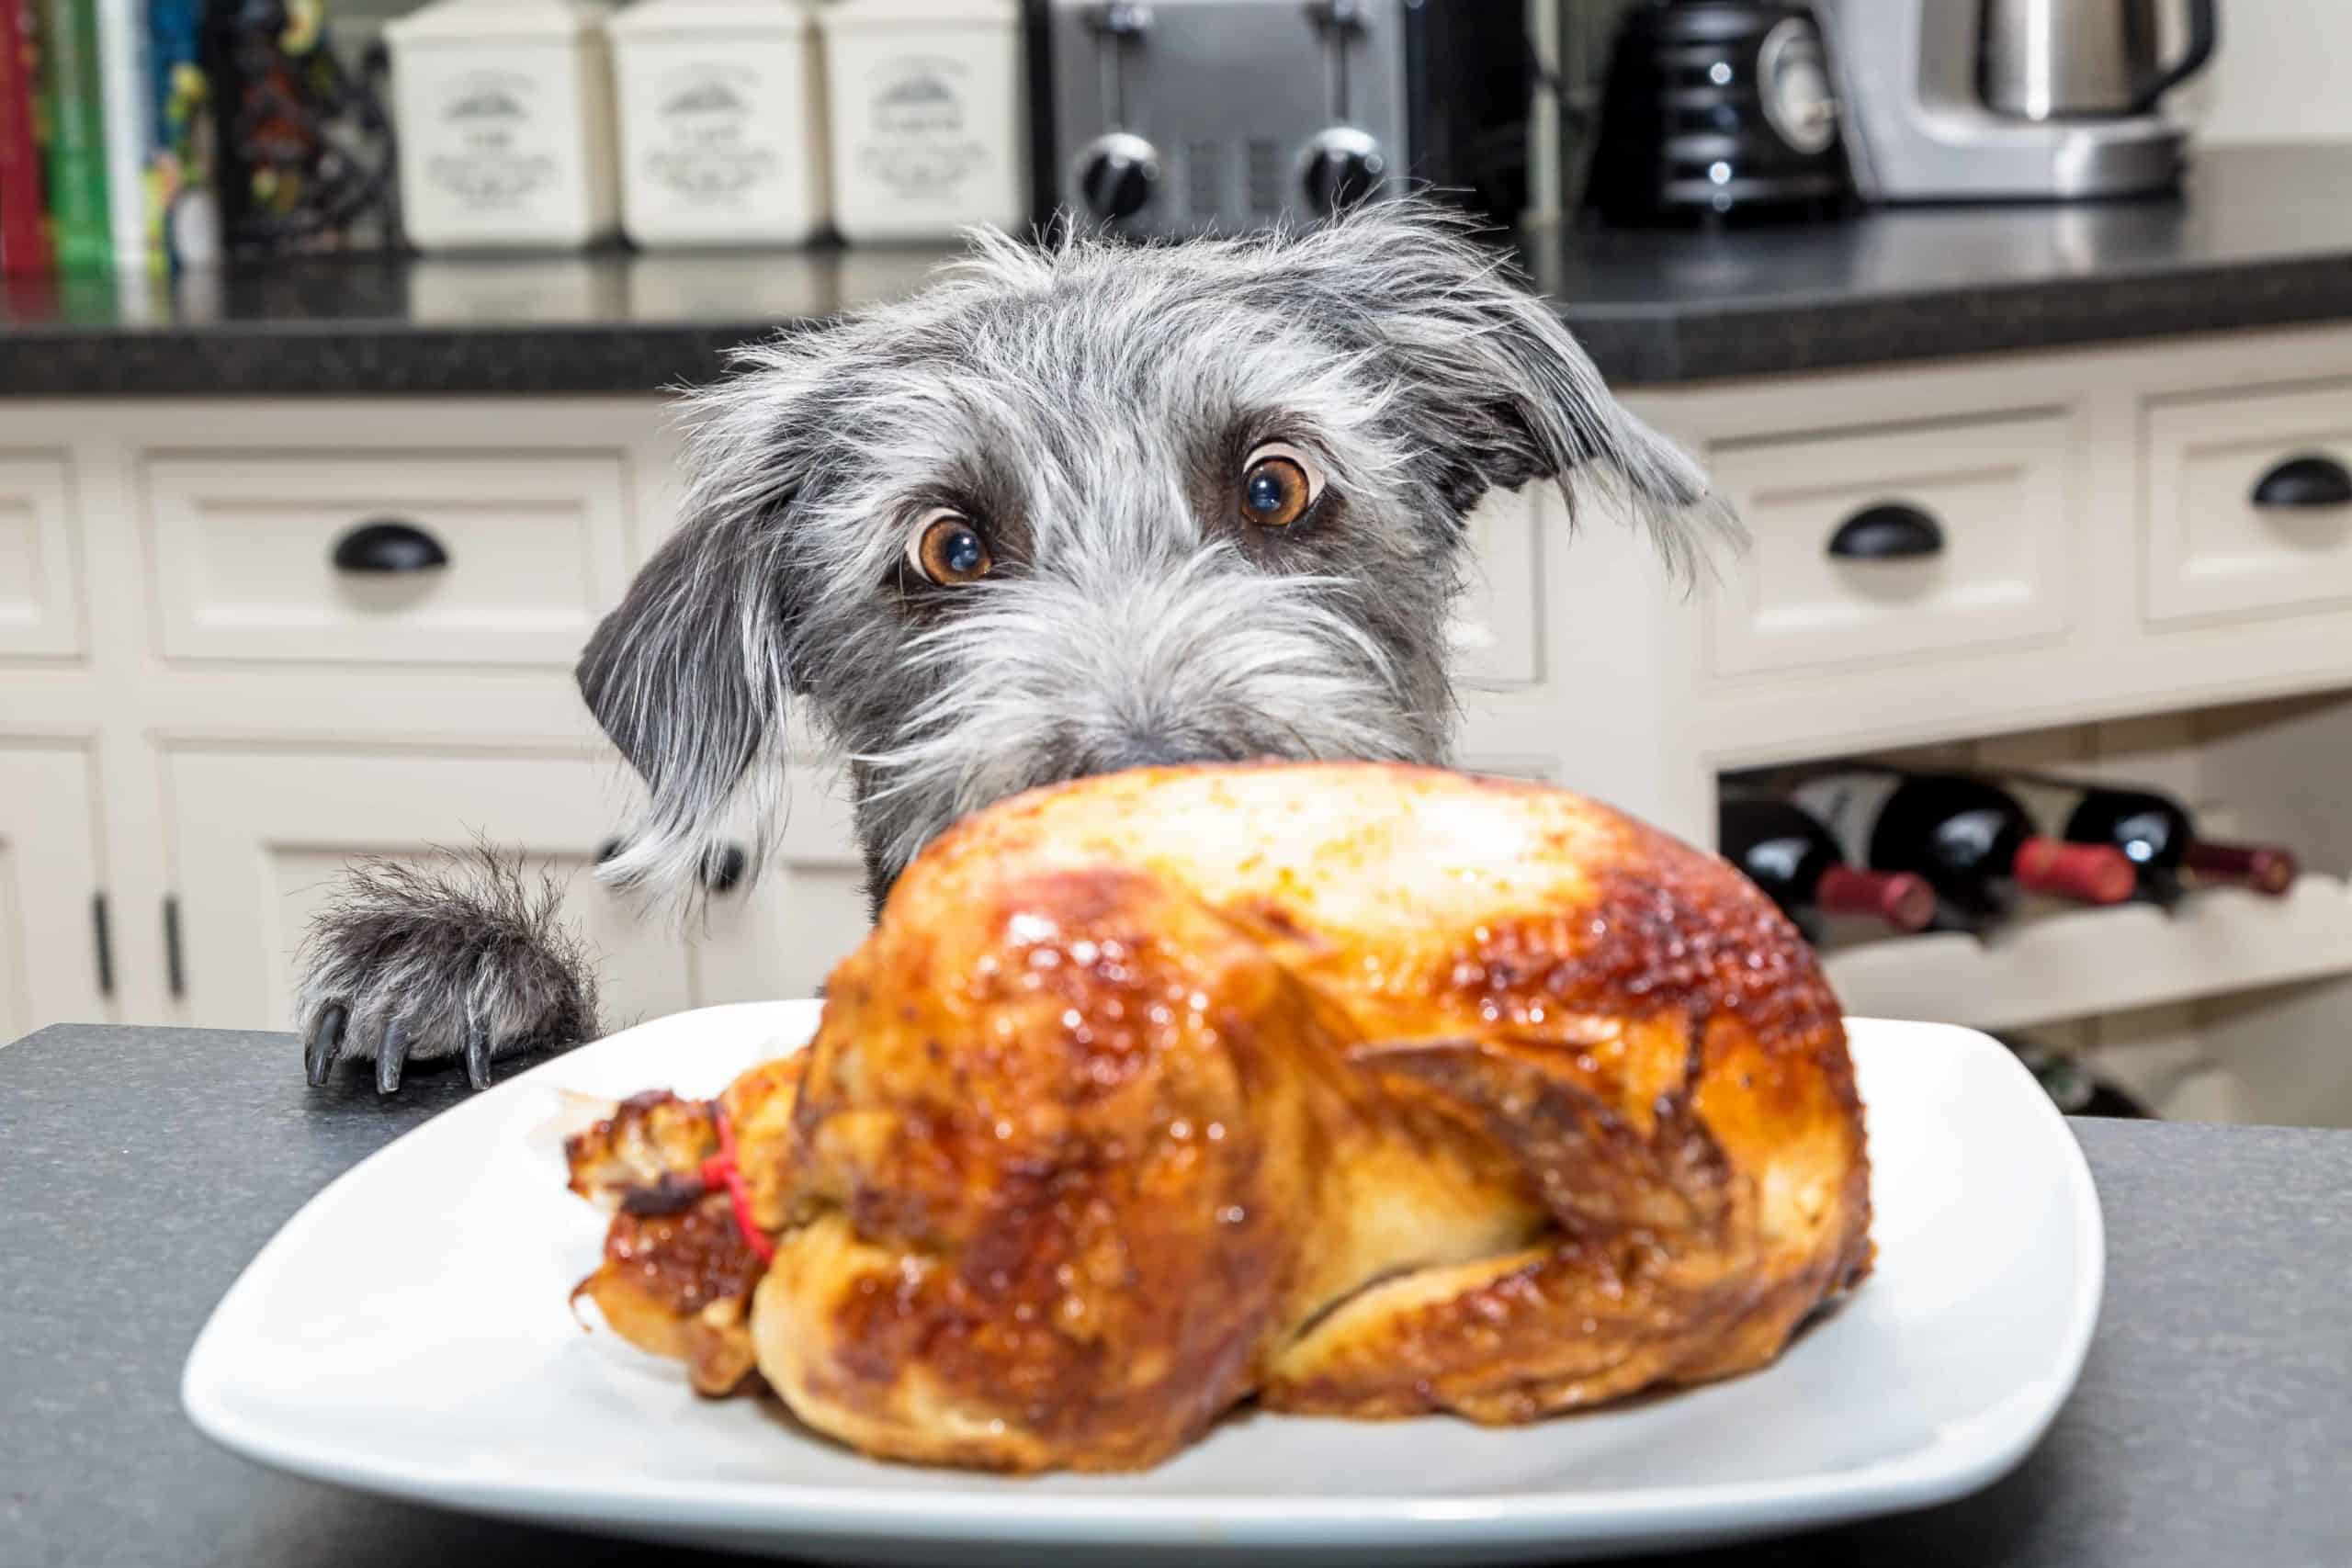 Dog eyes turkey sitting on the counter. Thanksgiving safety tips: Keep an eye on your dog if you have food on the counter. Dogs are opportunists who won't be shy about helping themselves if they can get away with it.